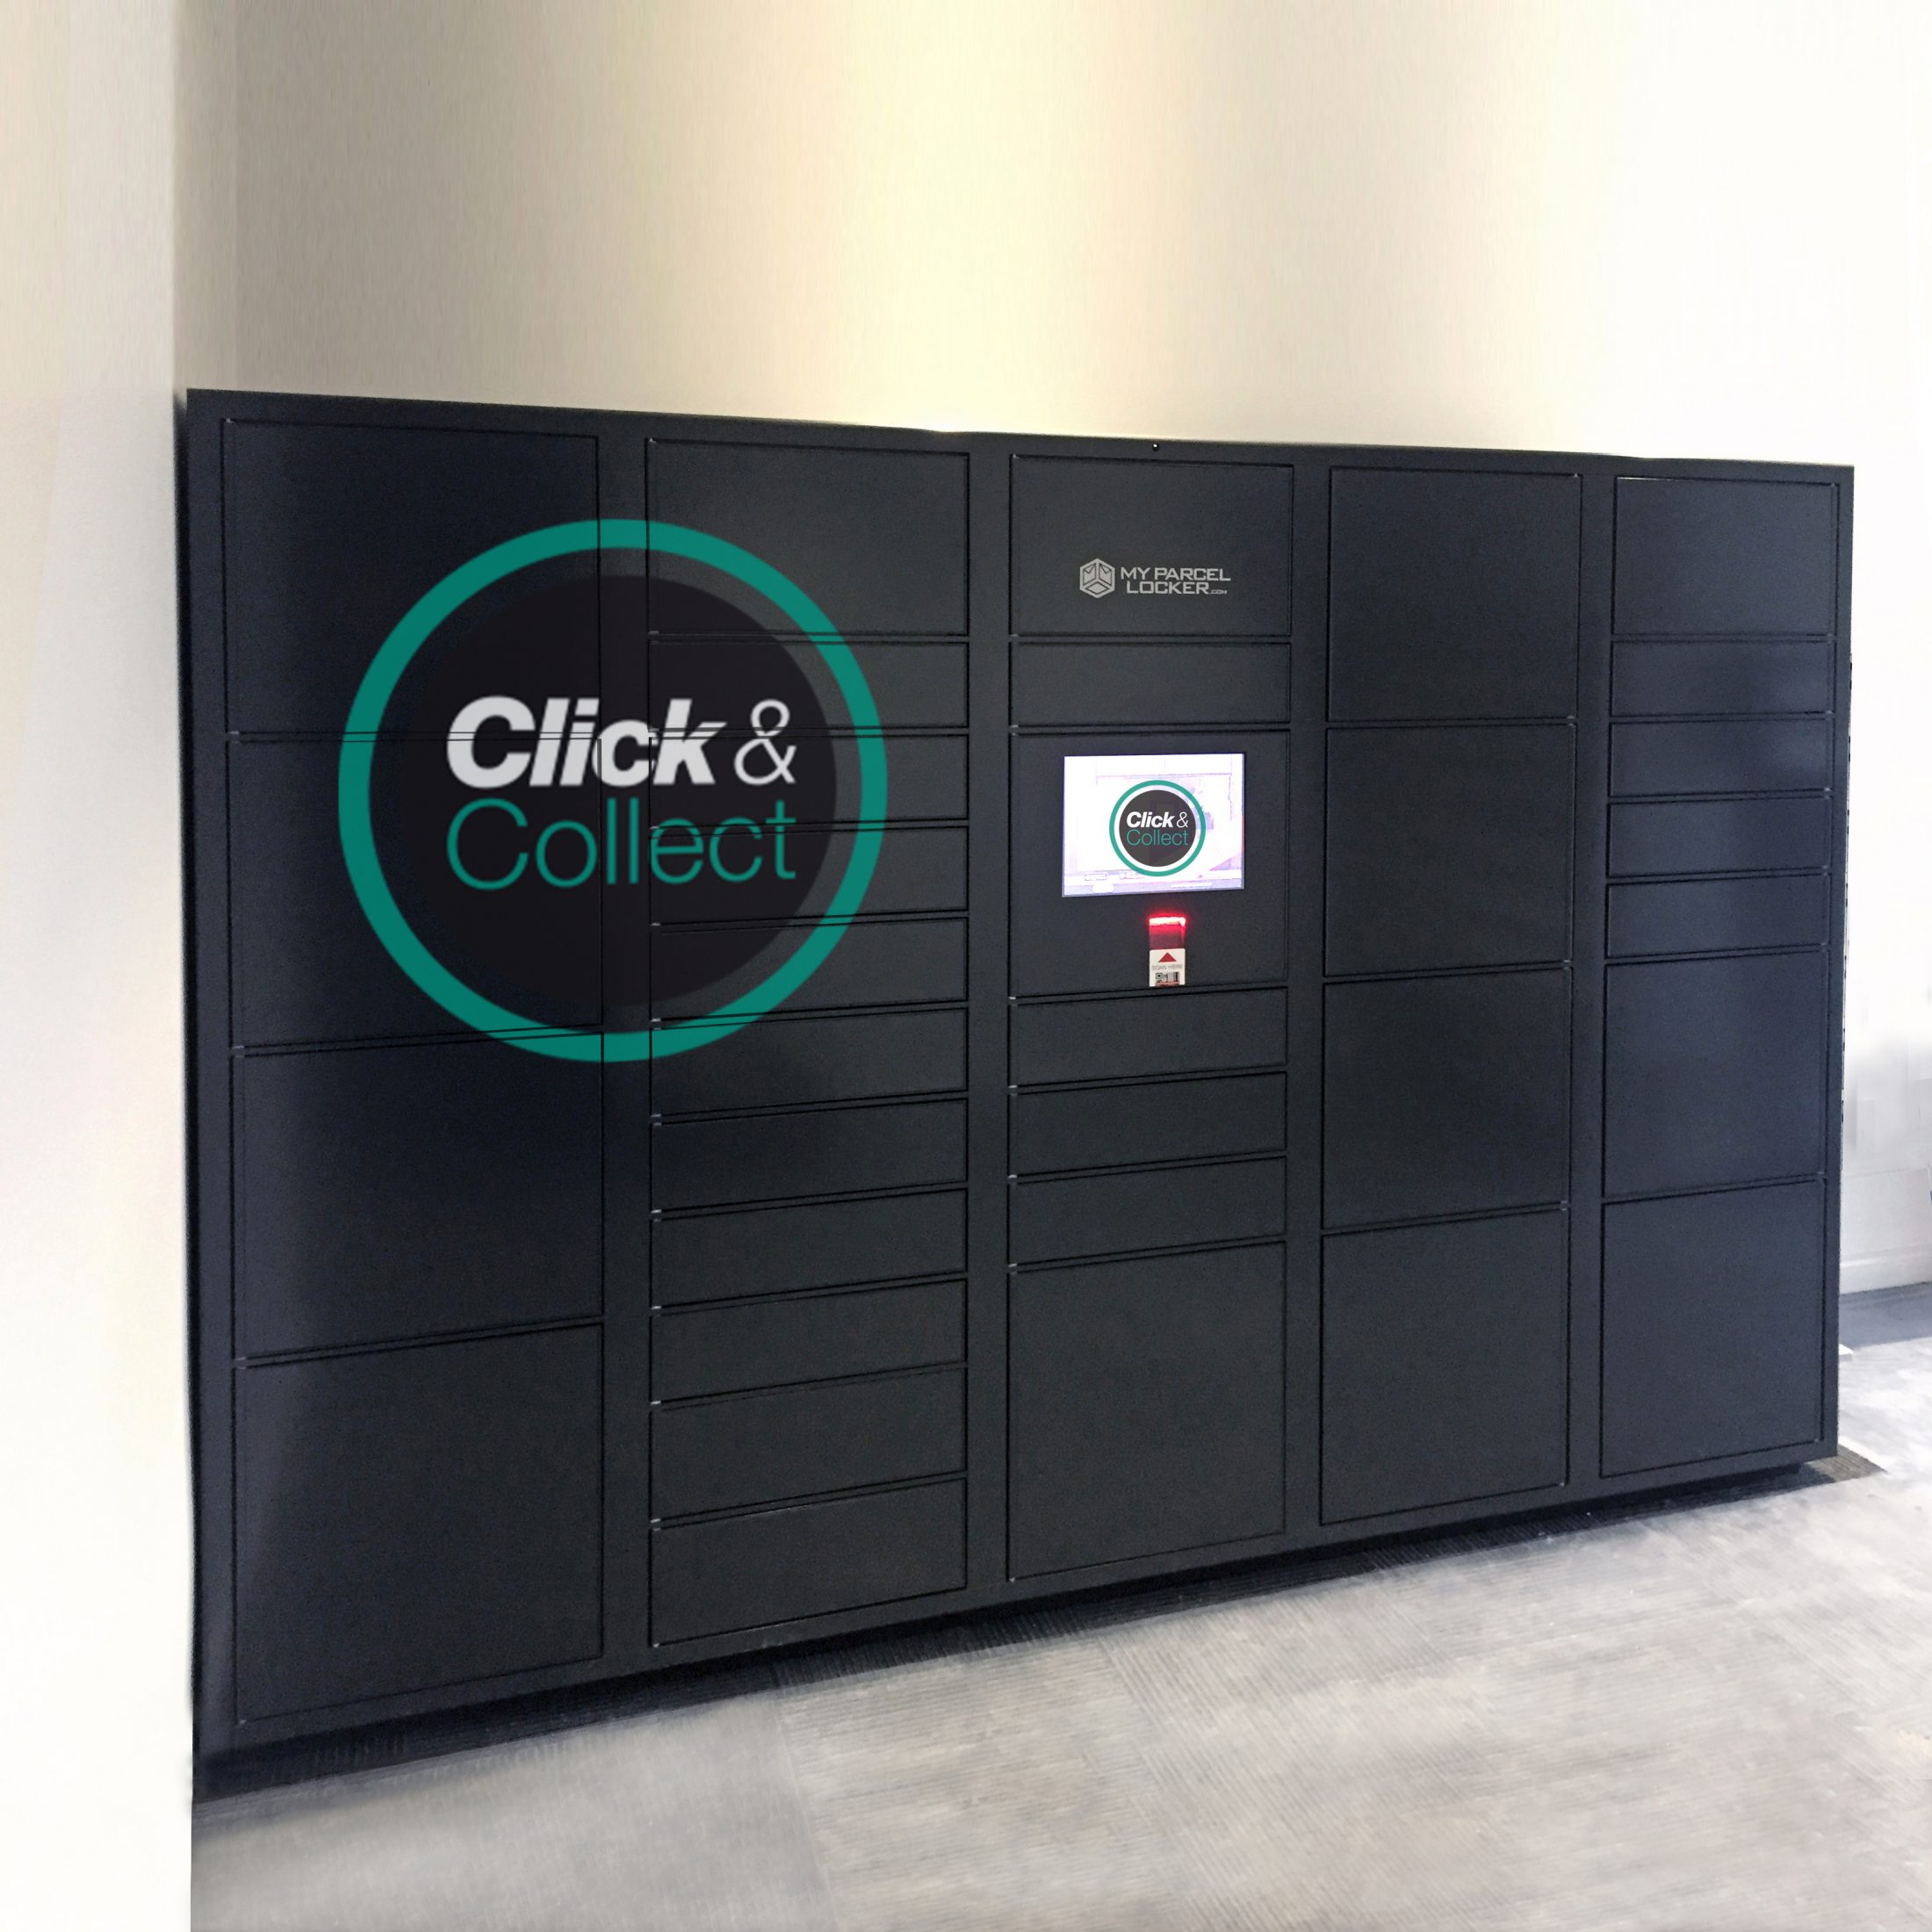 Click and collect lockers – a necessity that customers have come to expect